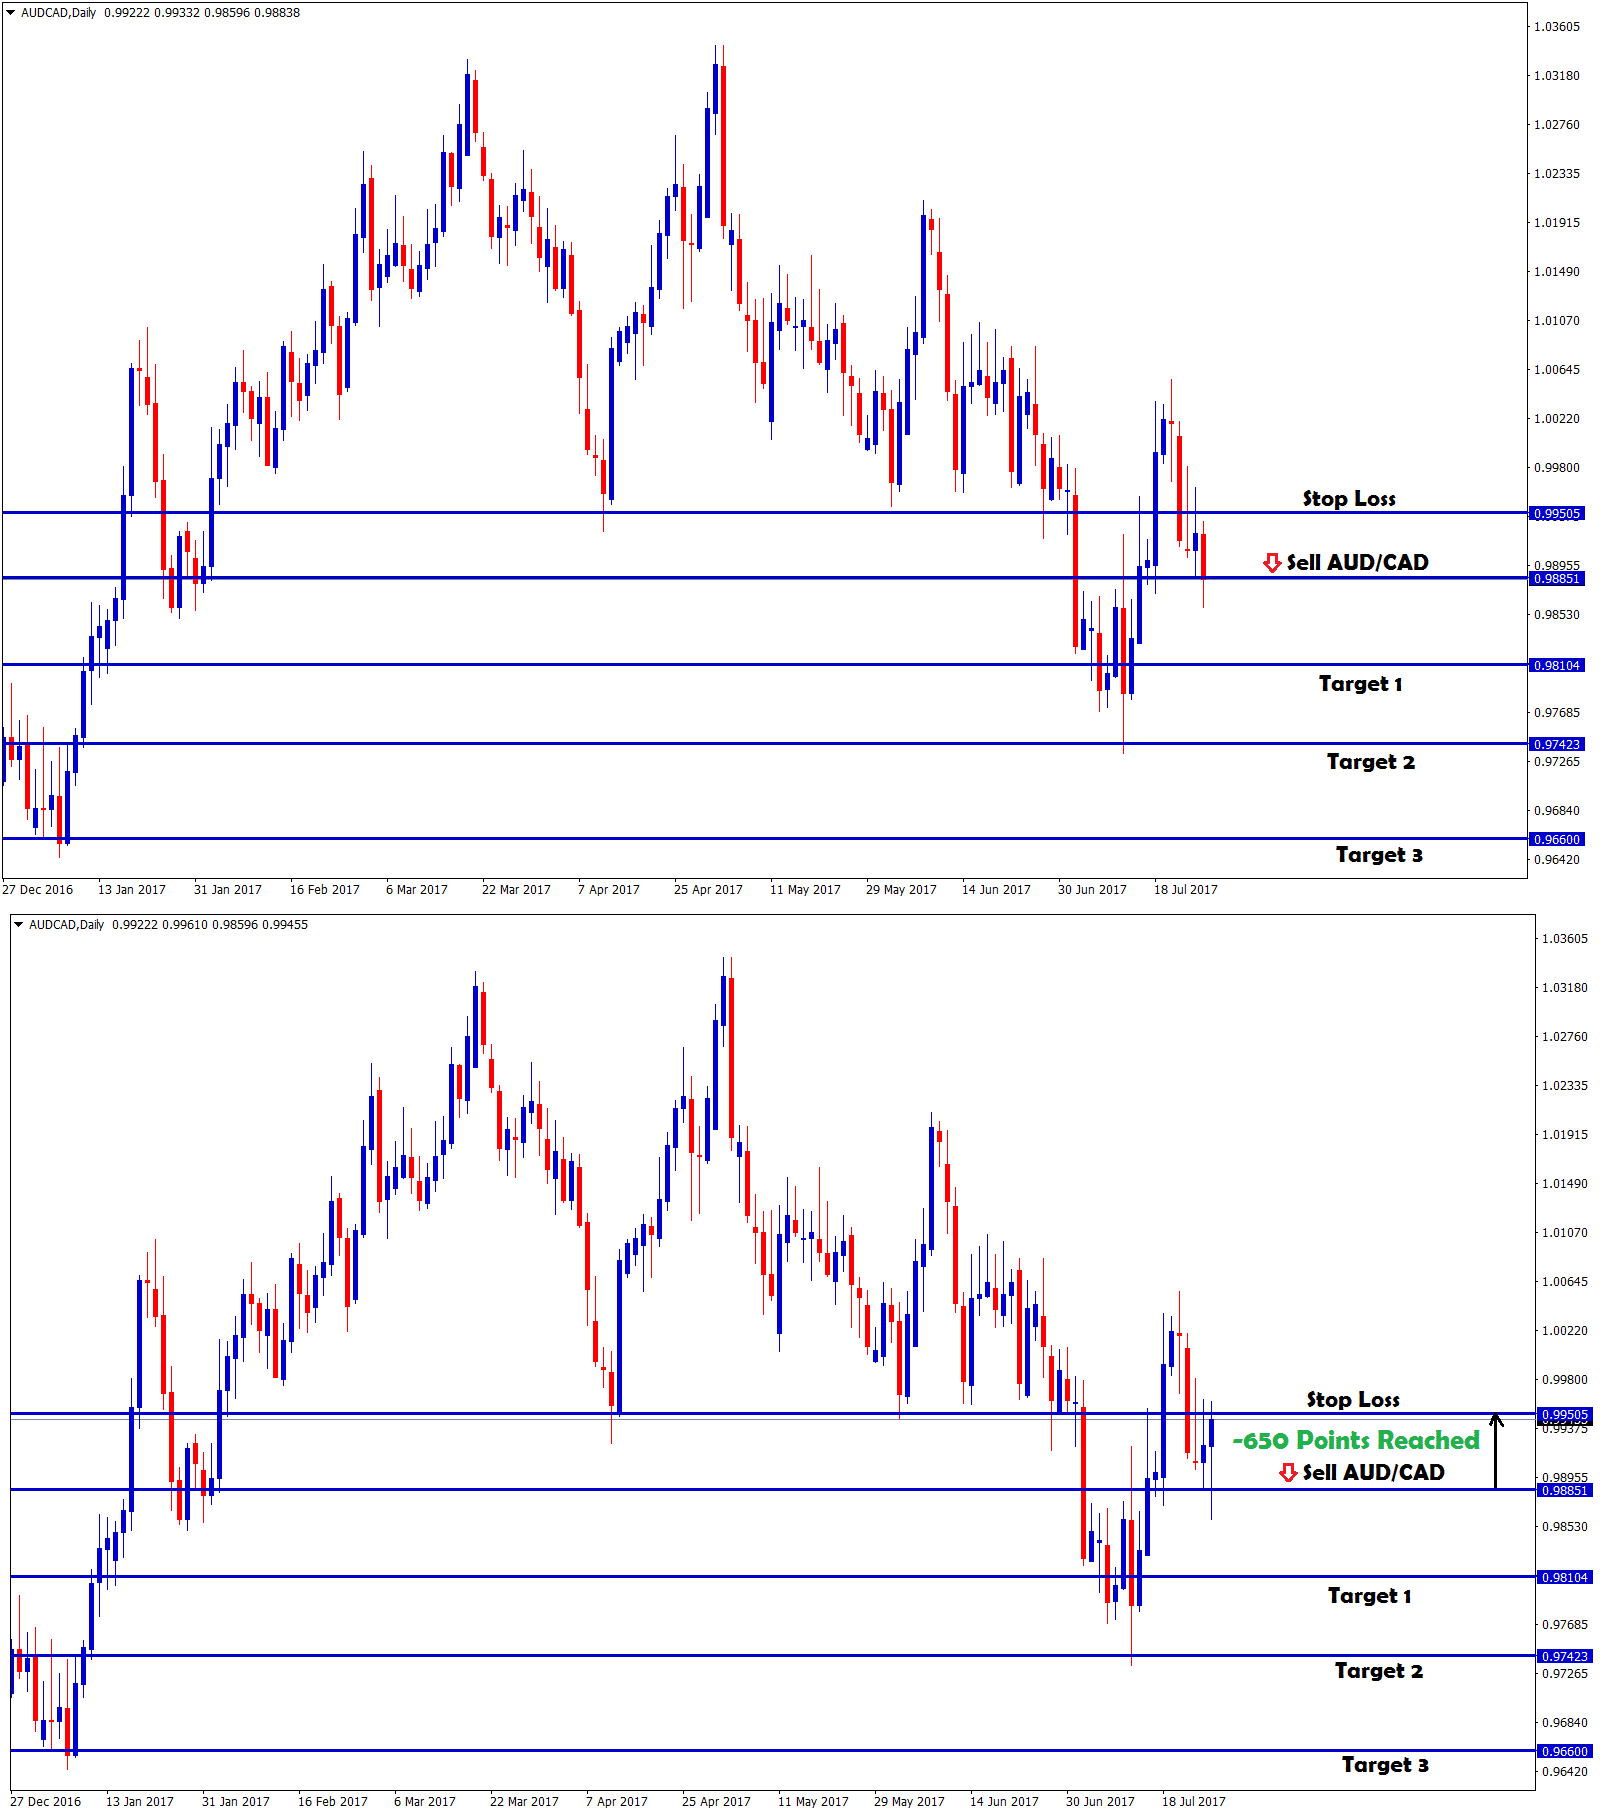 SELL AUDCAD hits stop loss price in daily chart